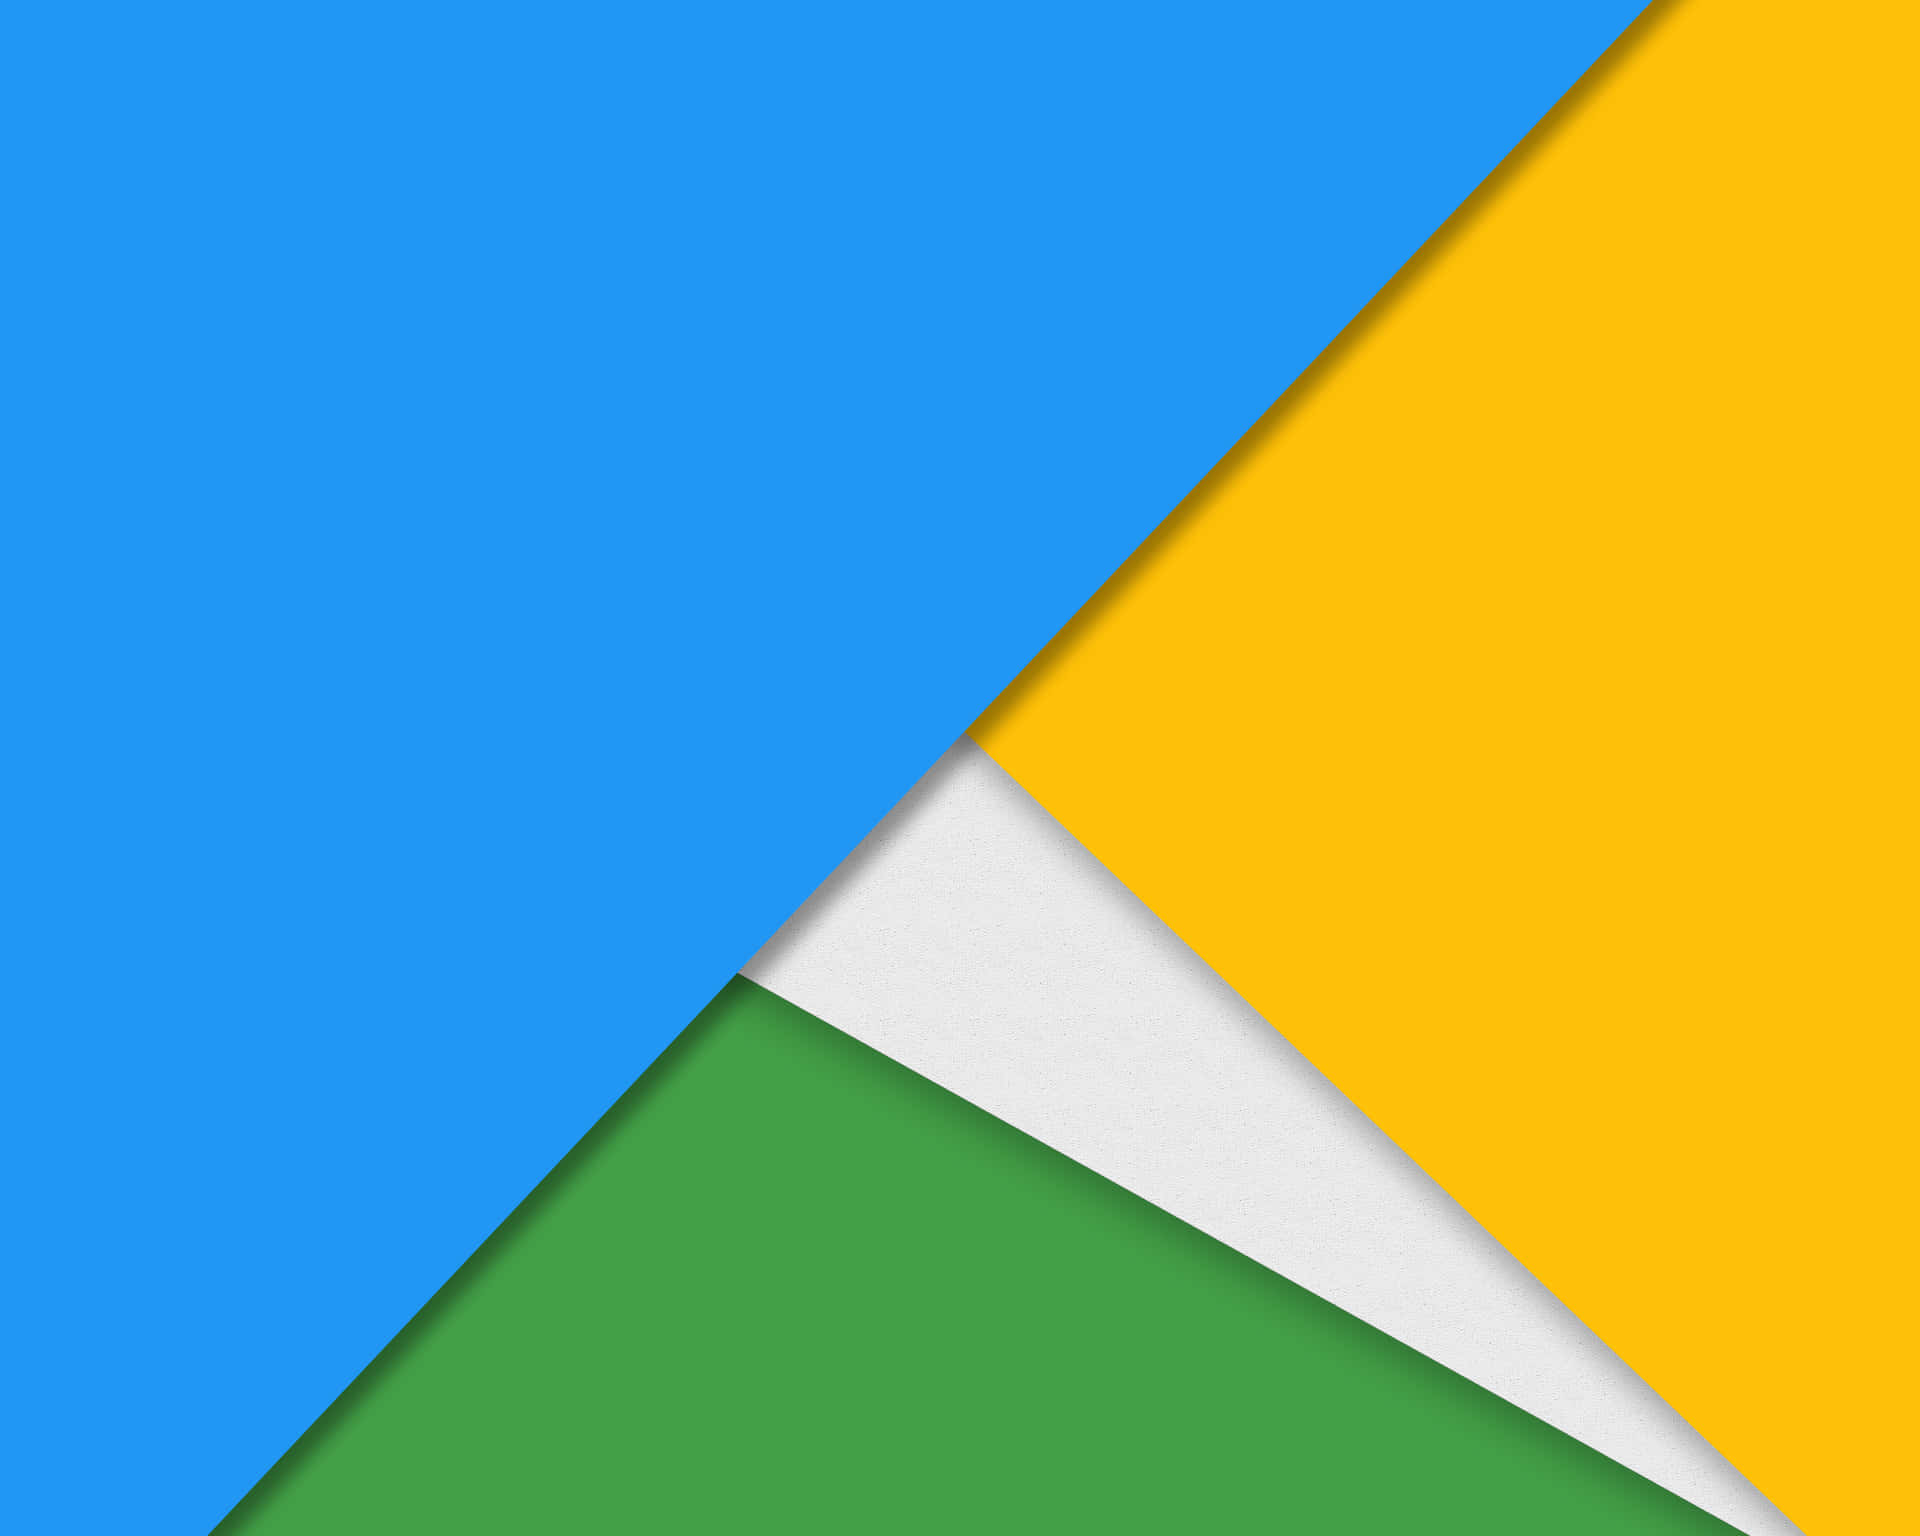 Google Chrome Logo With A Blue, Yellow And Green Color Wallpaper